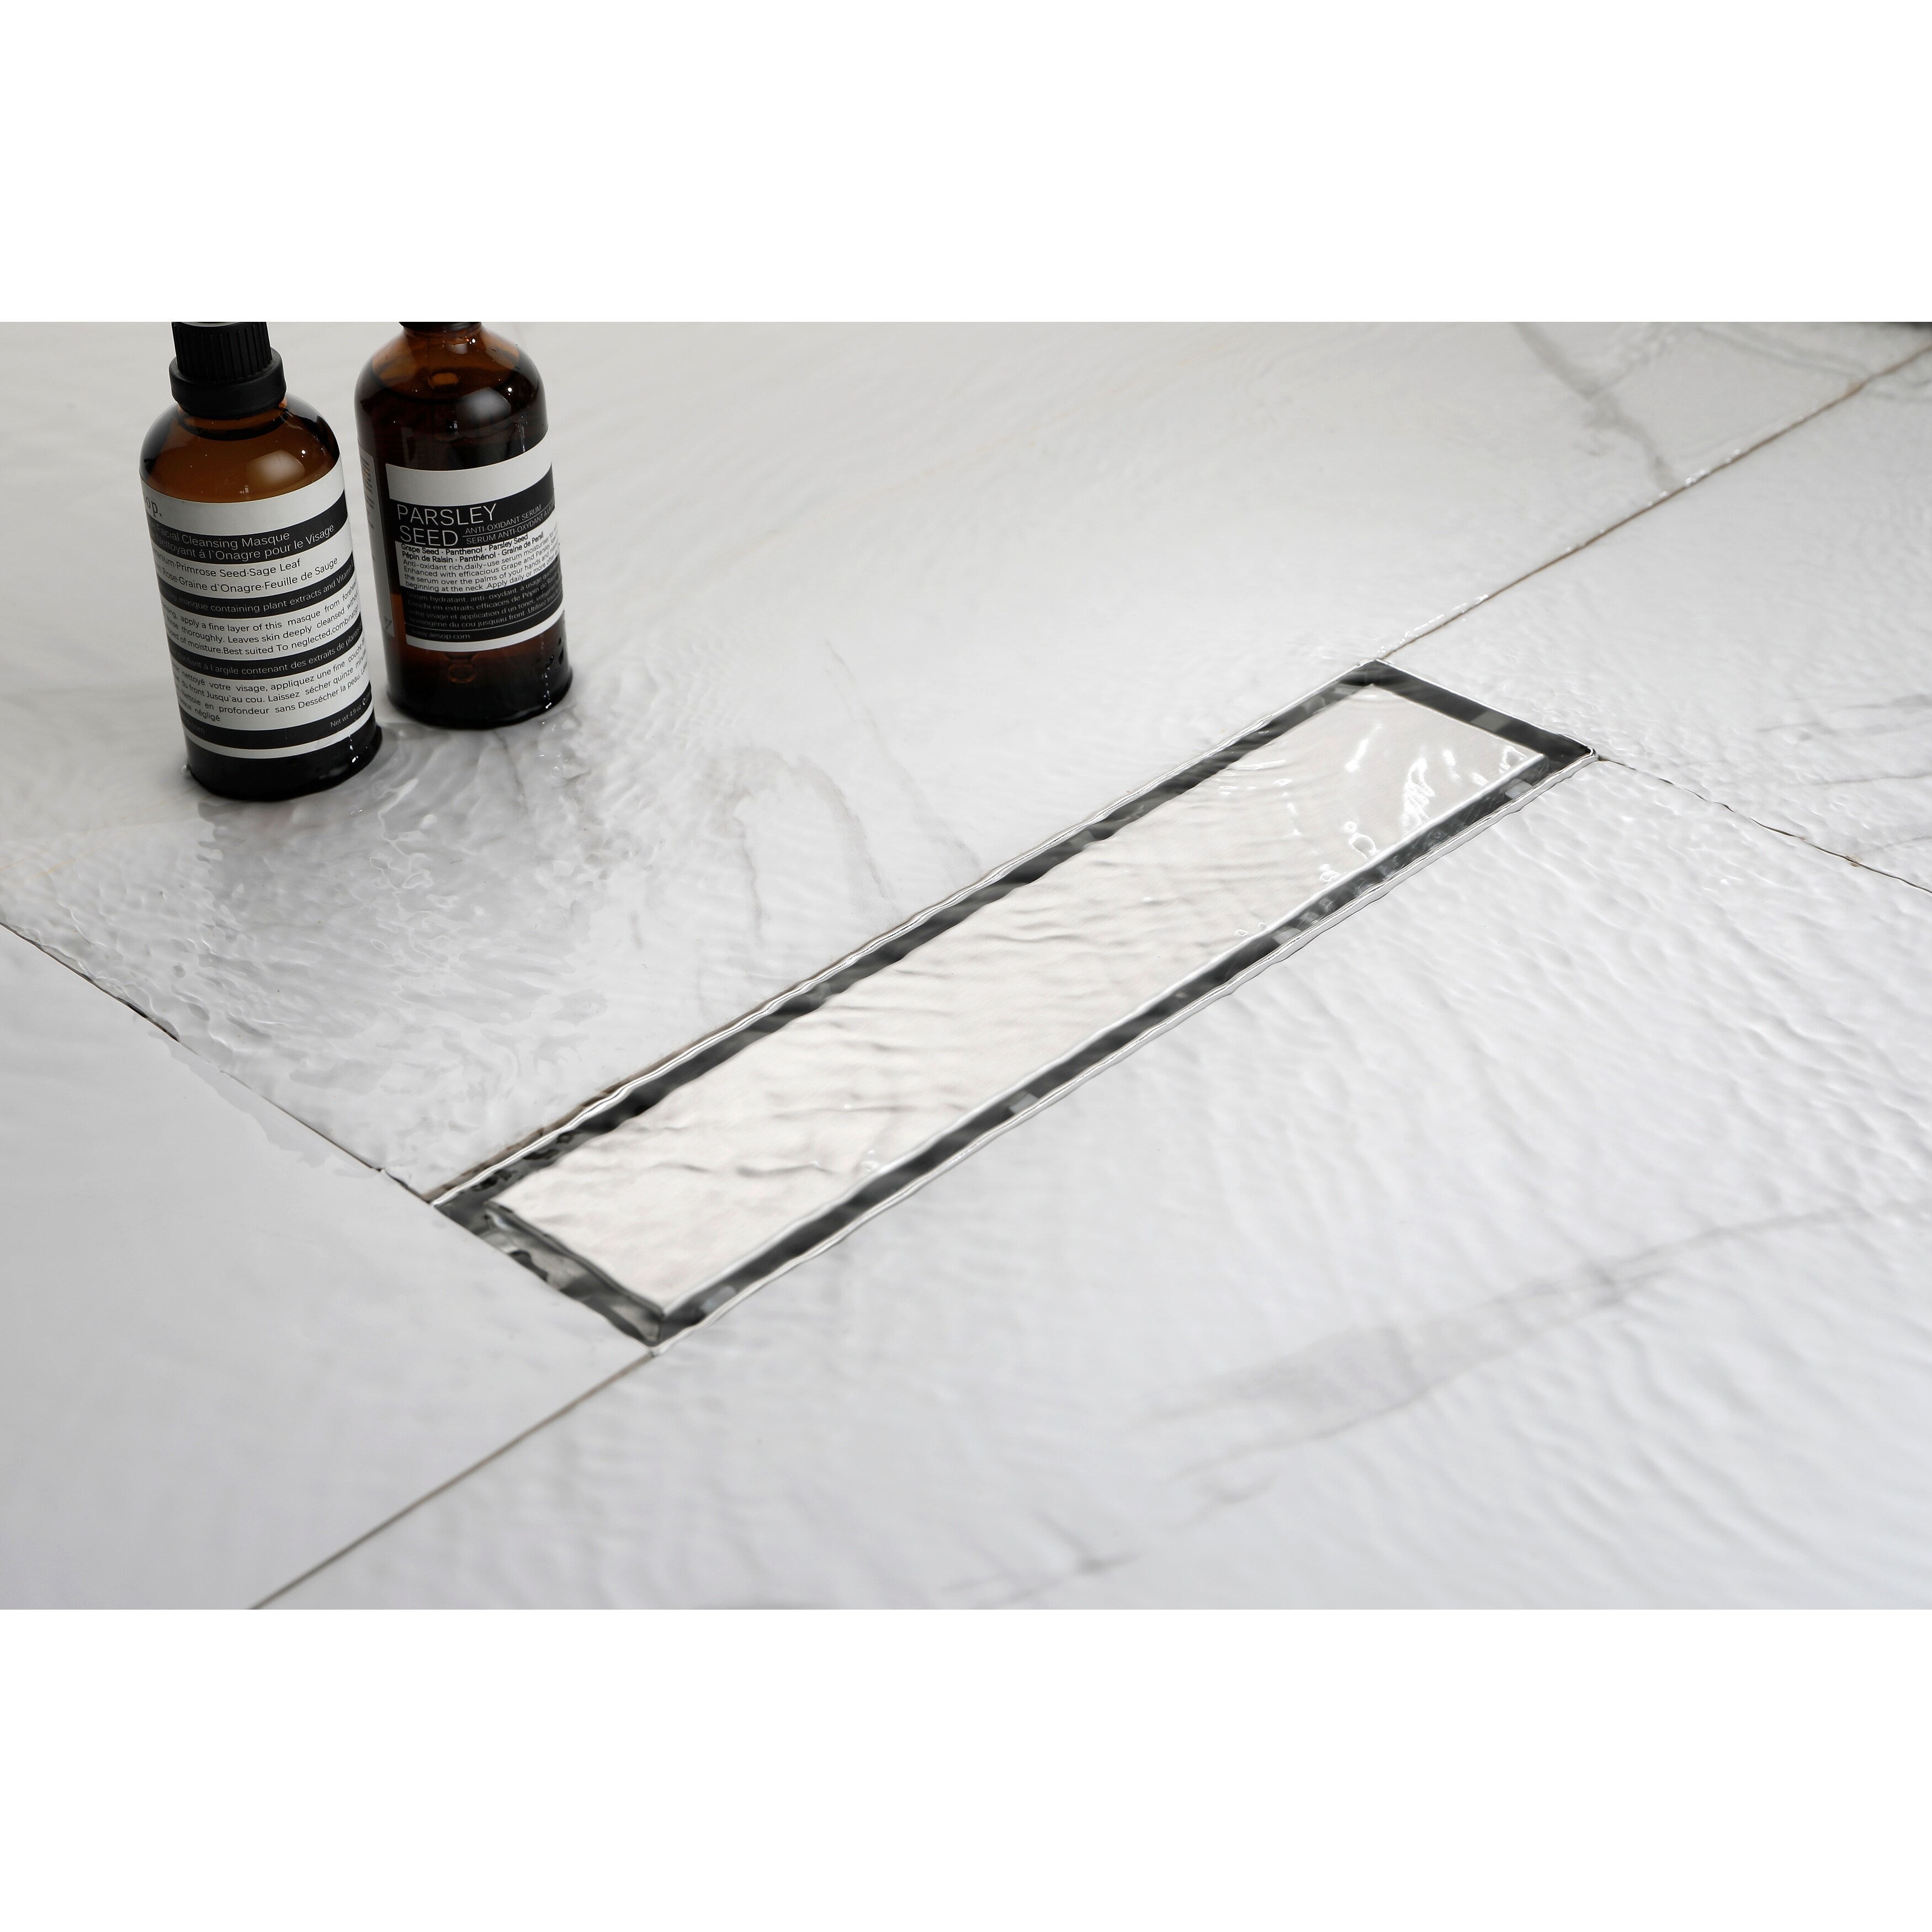 https://ak1.ostkcdn.com/images/products/is/images/direct/de70fb8cf90c719db78bd92f2d019a3b88087b2e/12-in-Square-Shower-Floor-Drain-with-Flange%2CFood-Grade-SUS-304-Stainless-Steel%2C-Pattern-Grate-Removable.jpg